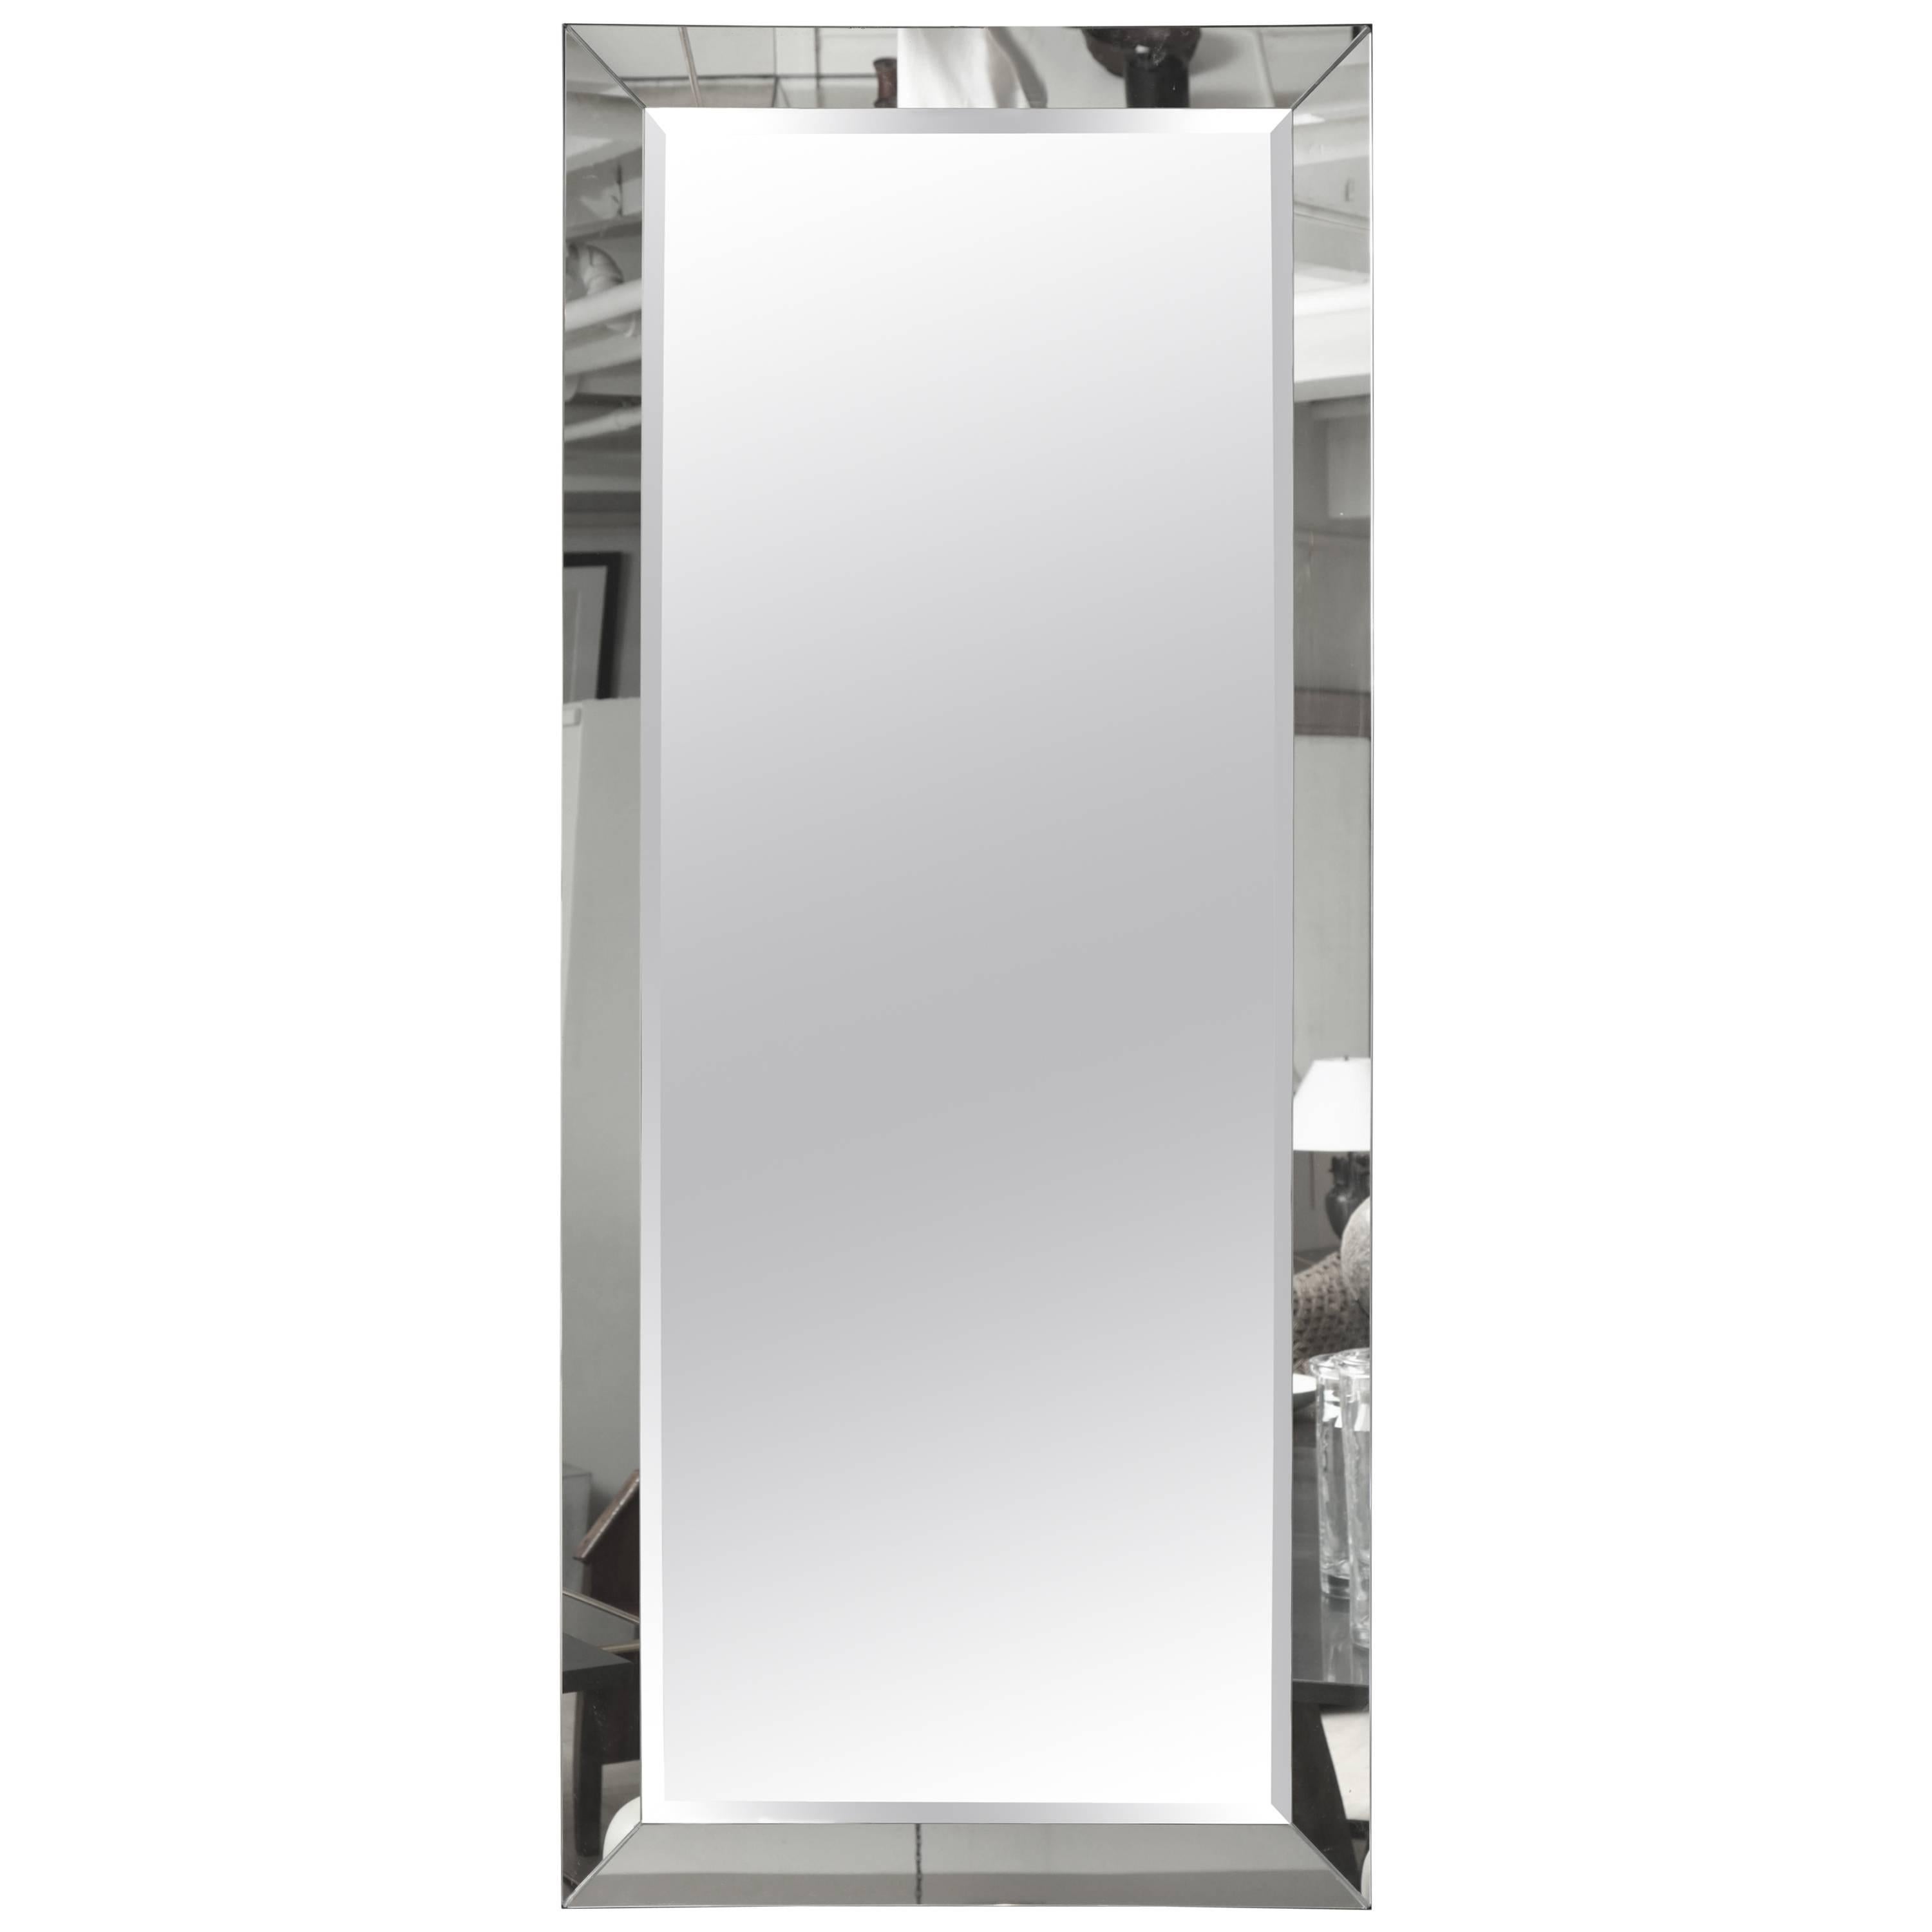 Mid-20th Century Venetian Mirror with Beveled Edges For Sale